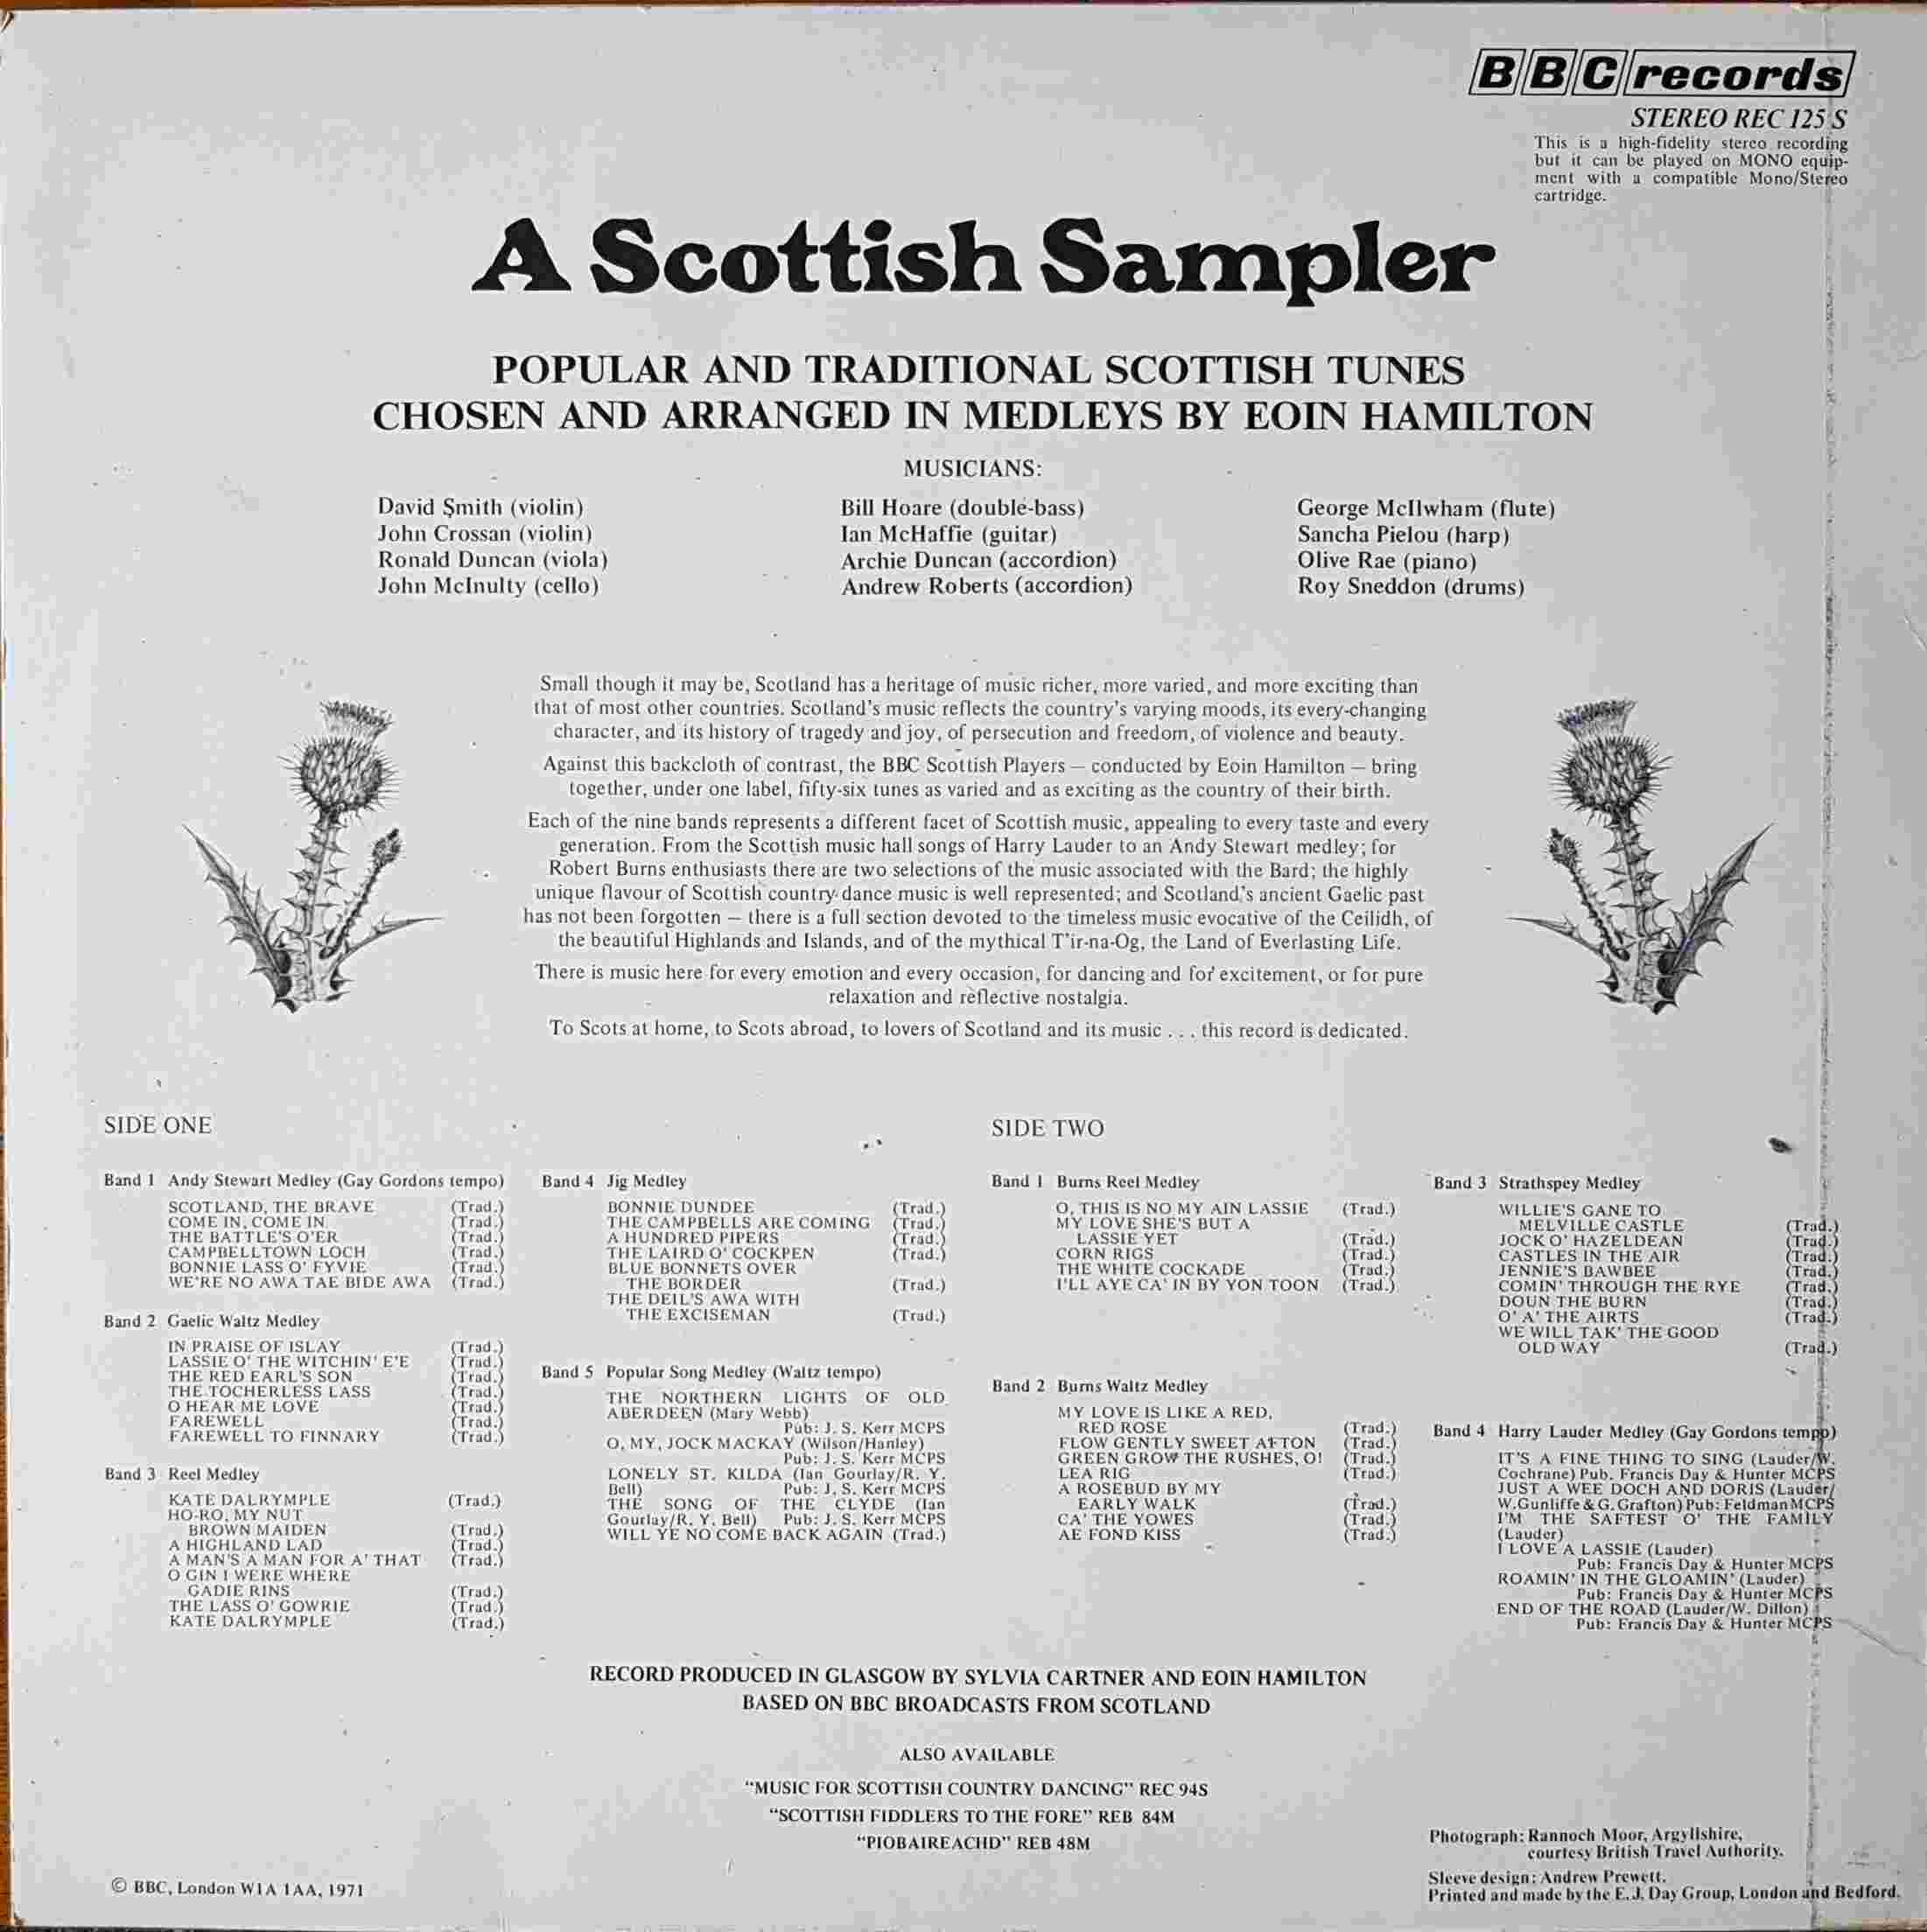 Picture of REC 125 Scottish sampler by artist Eoin Hamilton from the BBC records and Tapes library